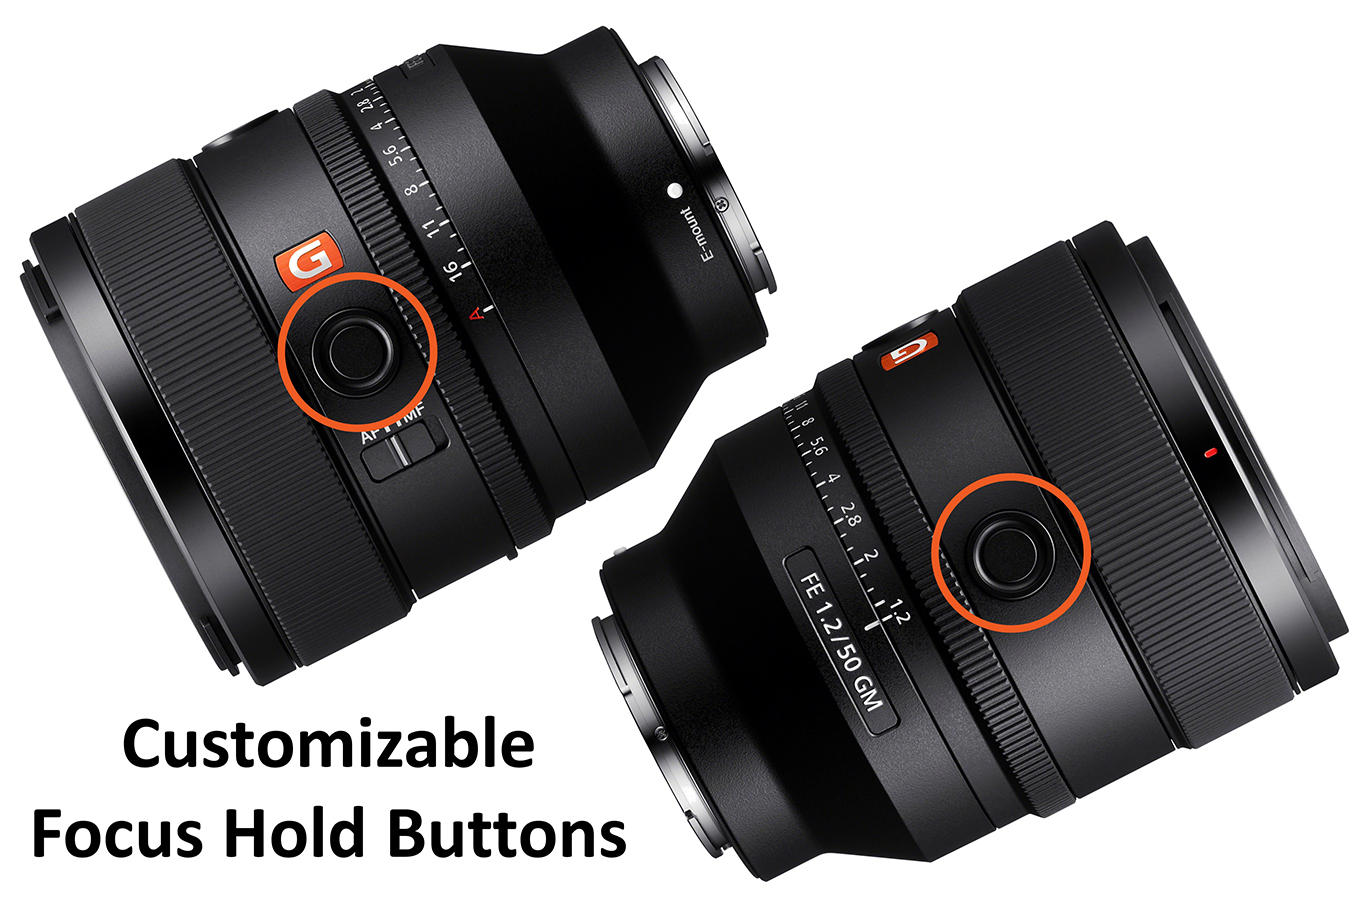 Sony FE 50mm F1.2 G Master Lens - Customizable Focus Hold Buttons